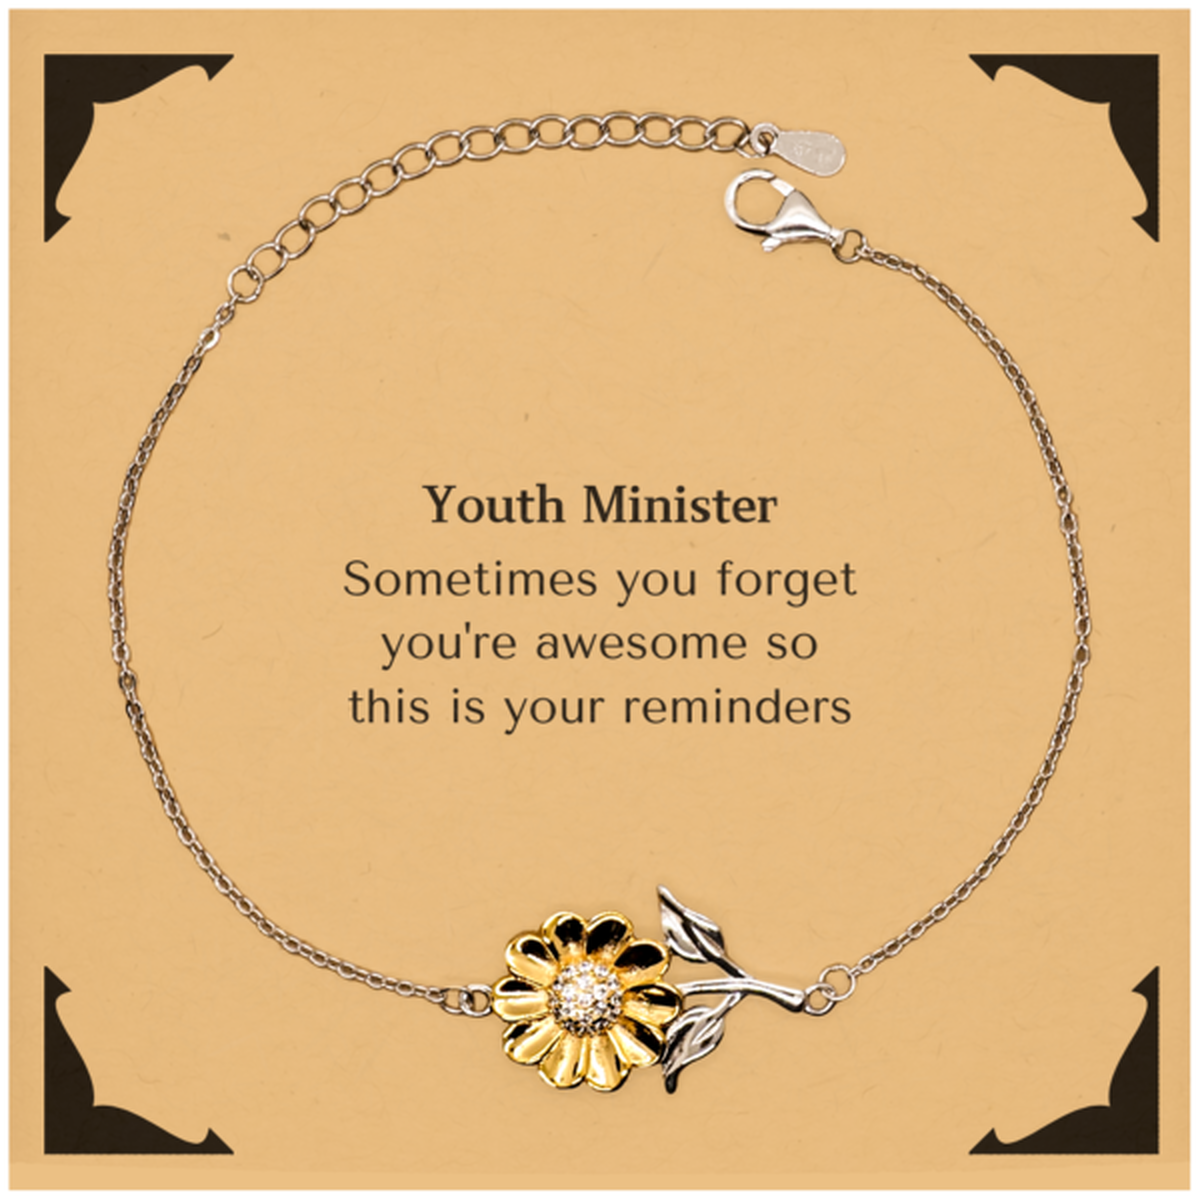 Sentimental Youth Minister Sunflower Bracelet, Youth Minister Sometimes you forget you're awesome so this is your reminders, Graduation Christmas Birthday Gifts for Youth Minister, Men, Women, Coworkers